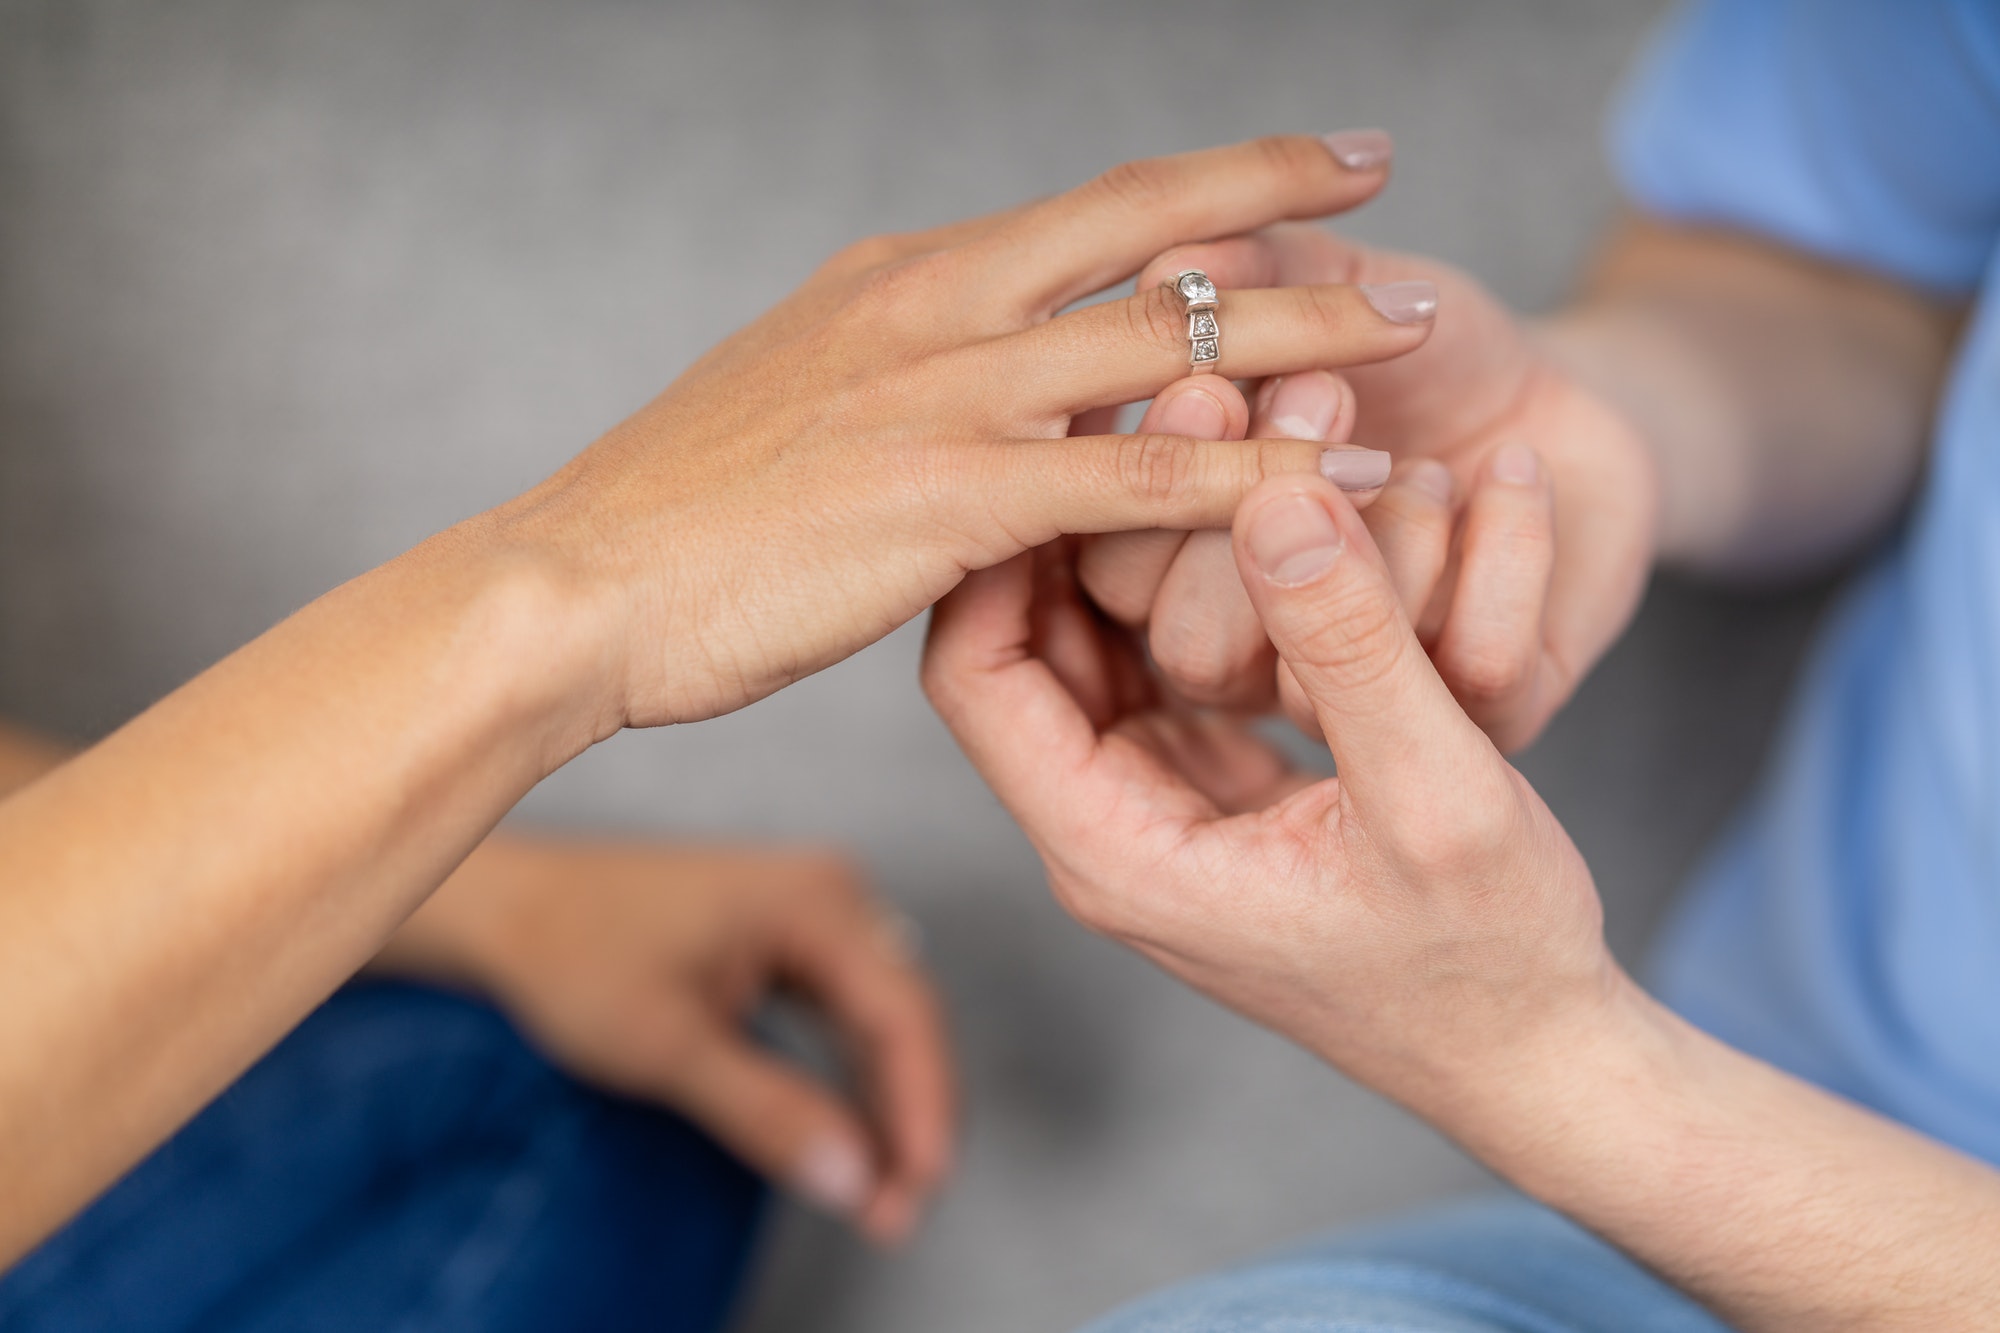 Man proposing marriage with a ring to a woman